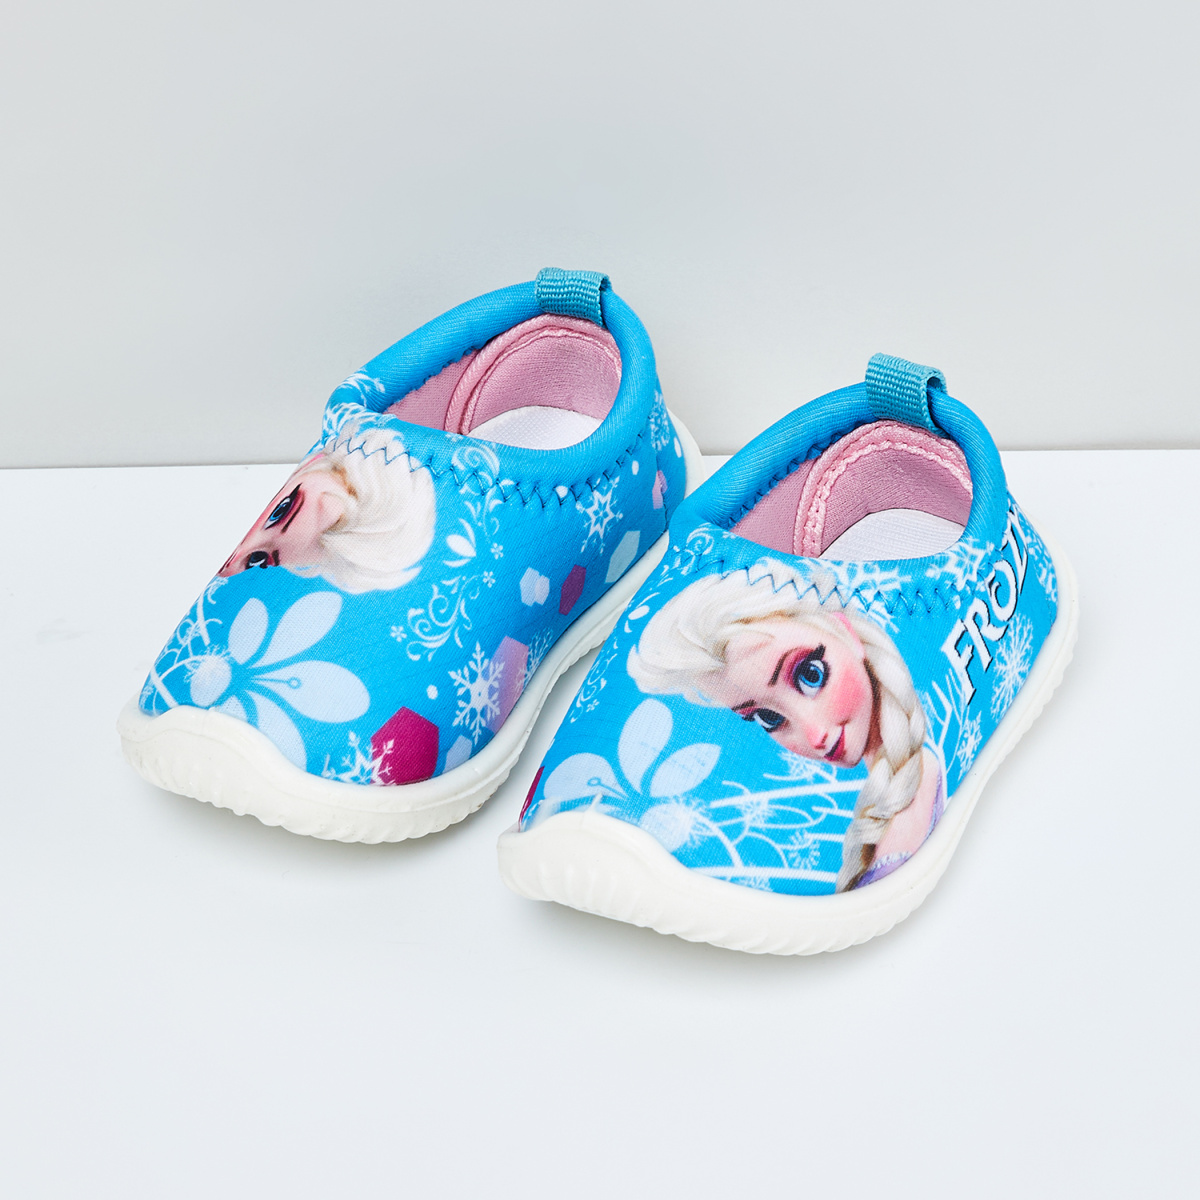 MAX Printed Slip-On Shoes